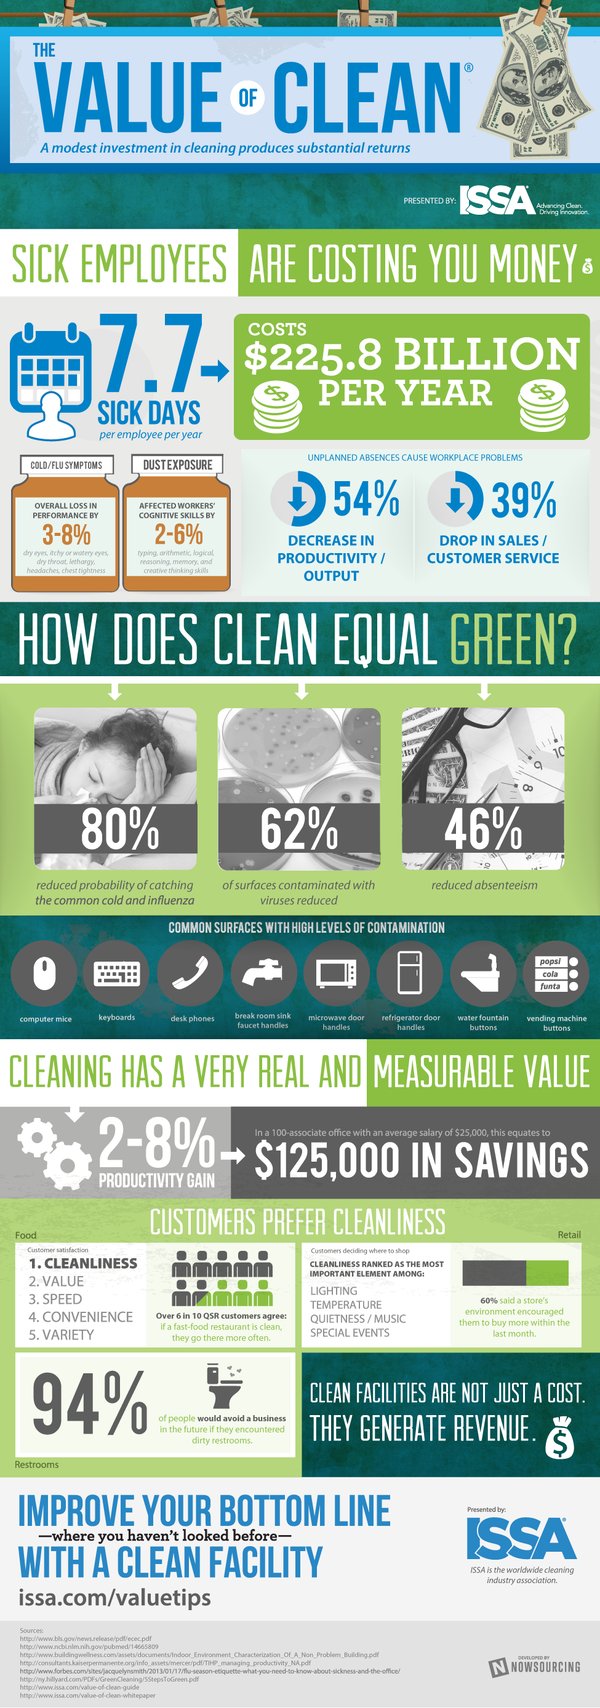 issa-value-of-clean-infographic